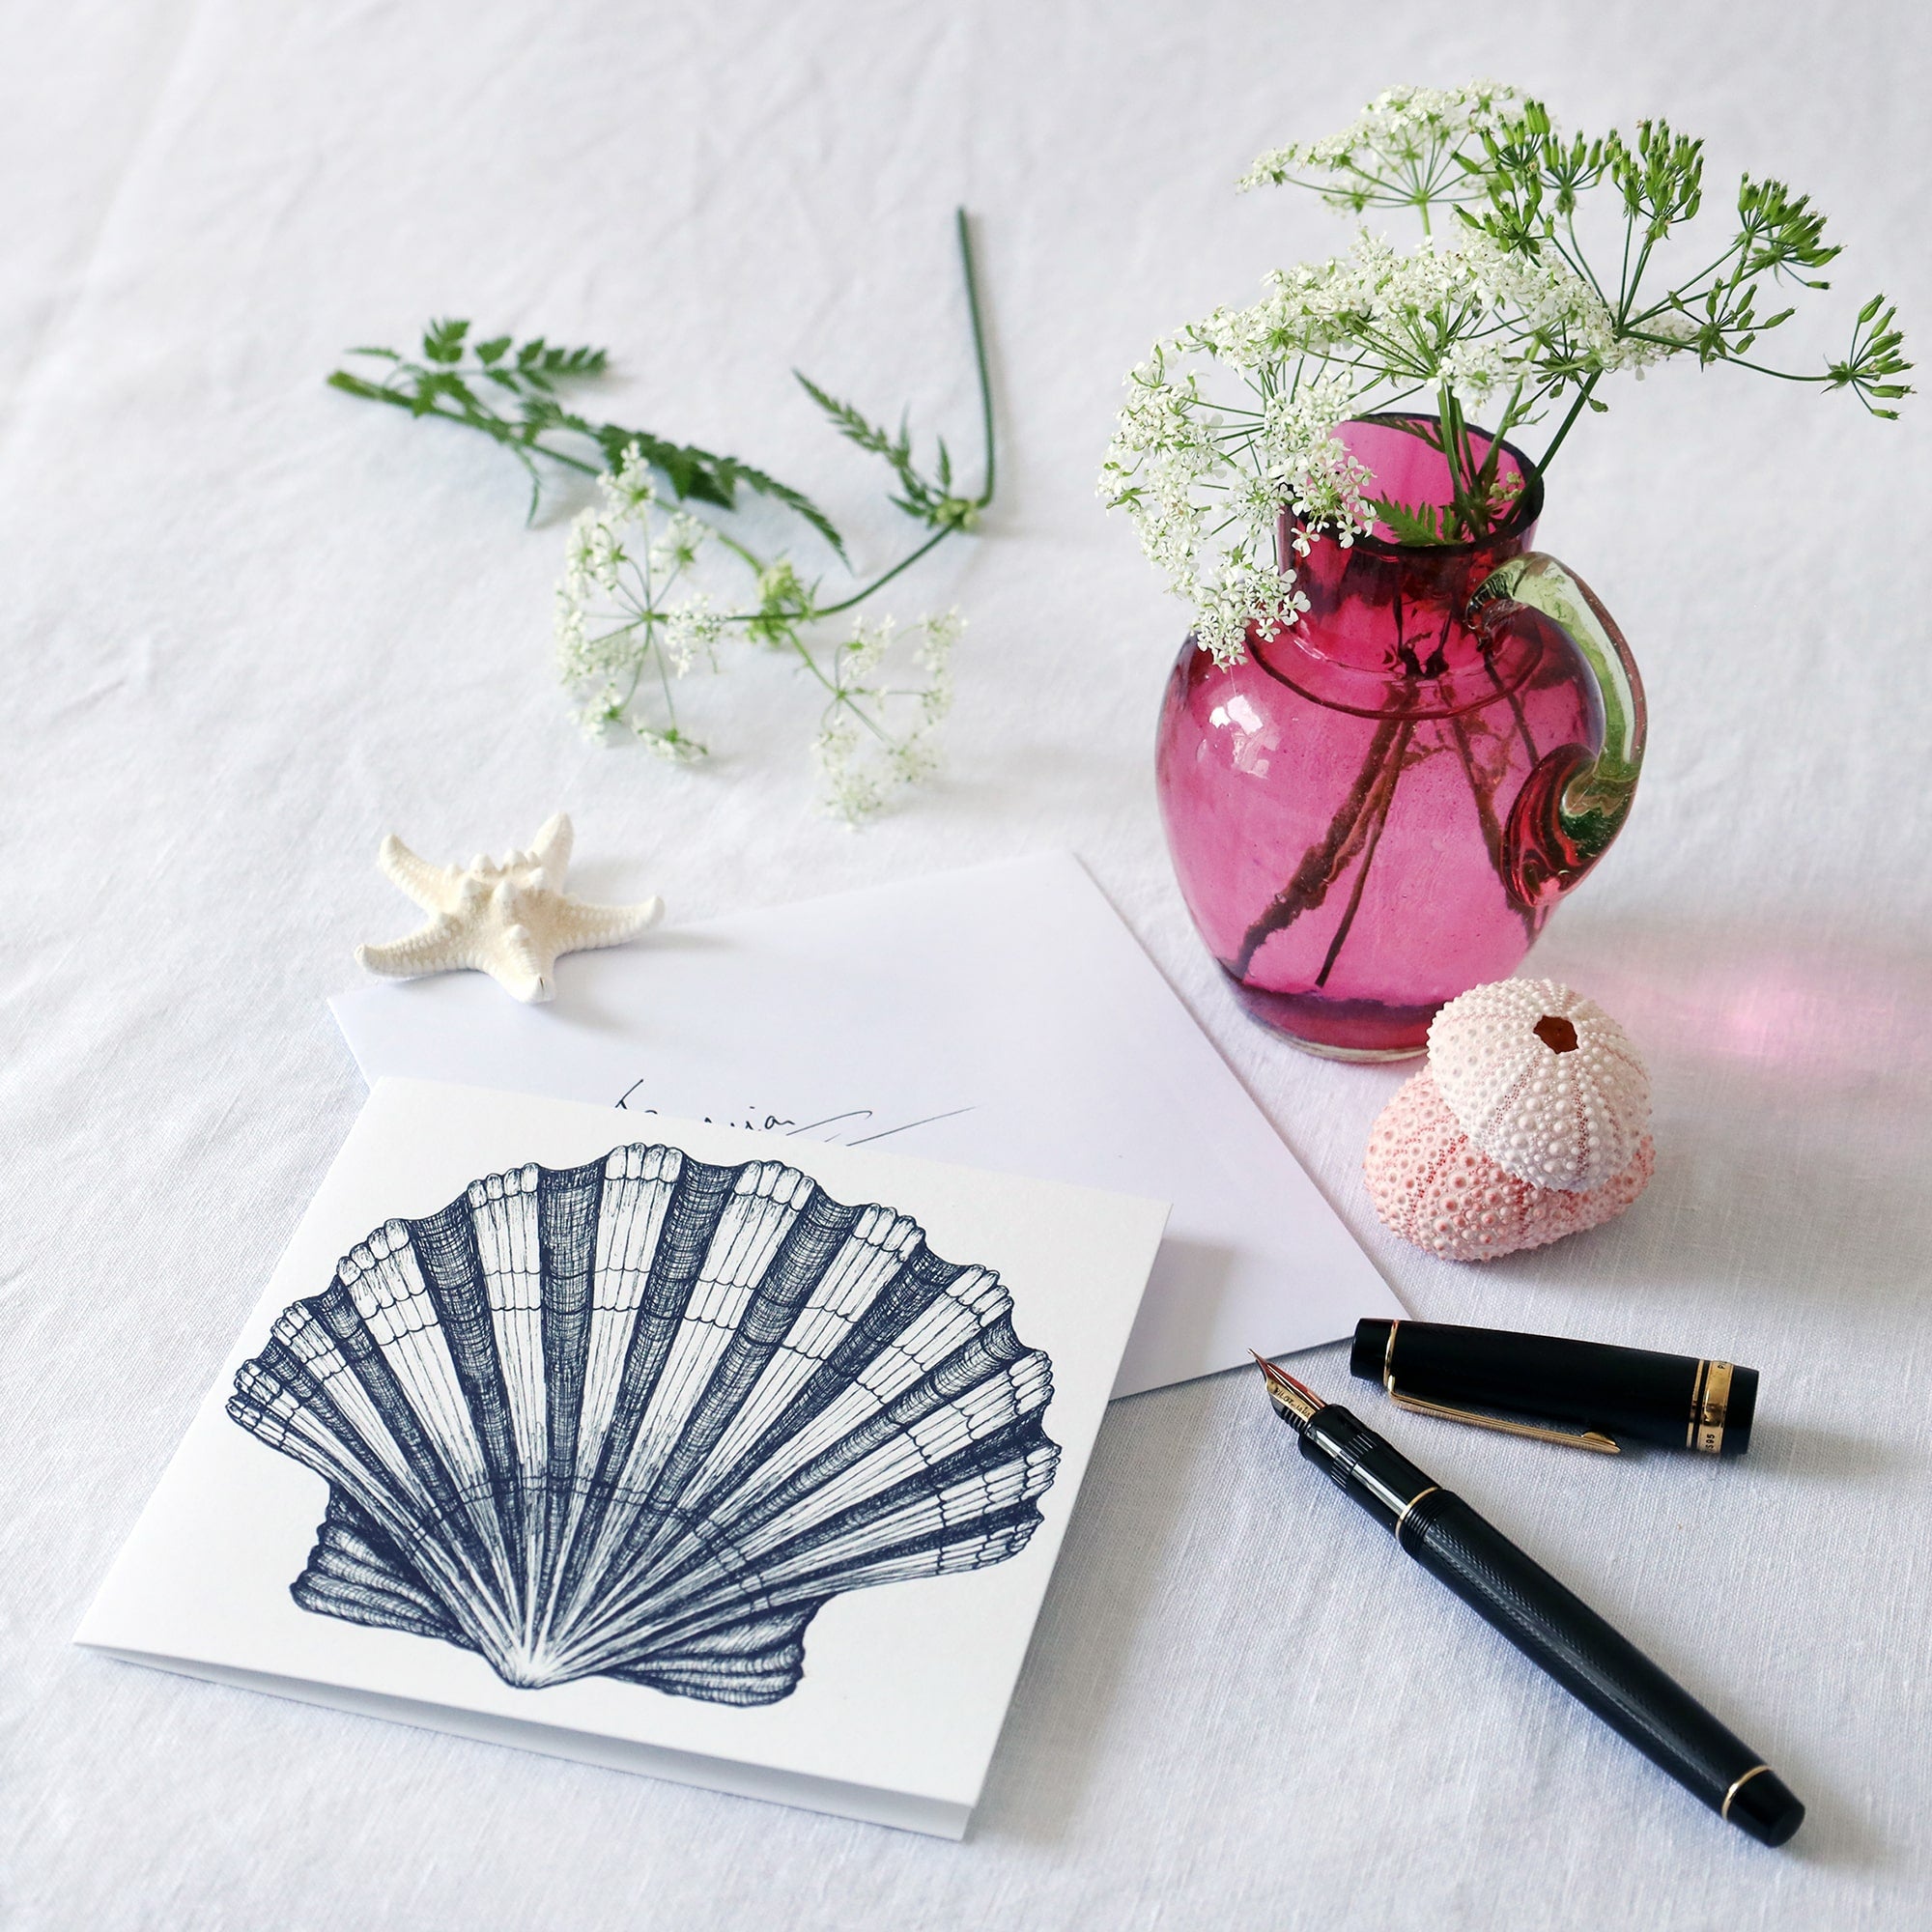 greeting card with navy illustration of a scallop shell on a white background lying on a white table cloth with a fountain pen, hand written envelope shells and a small cranberry glass jug with wild flowers in 